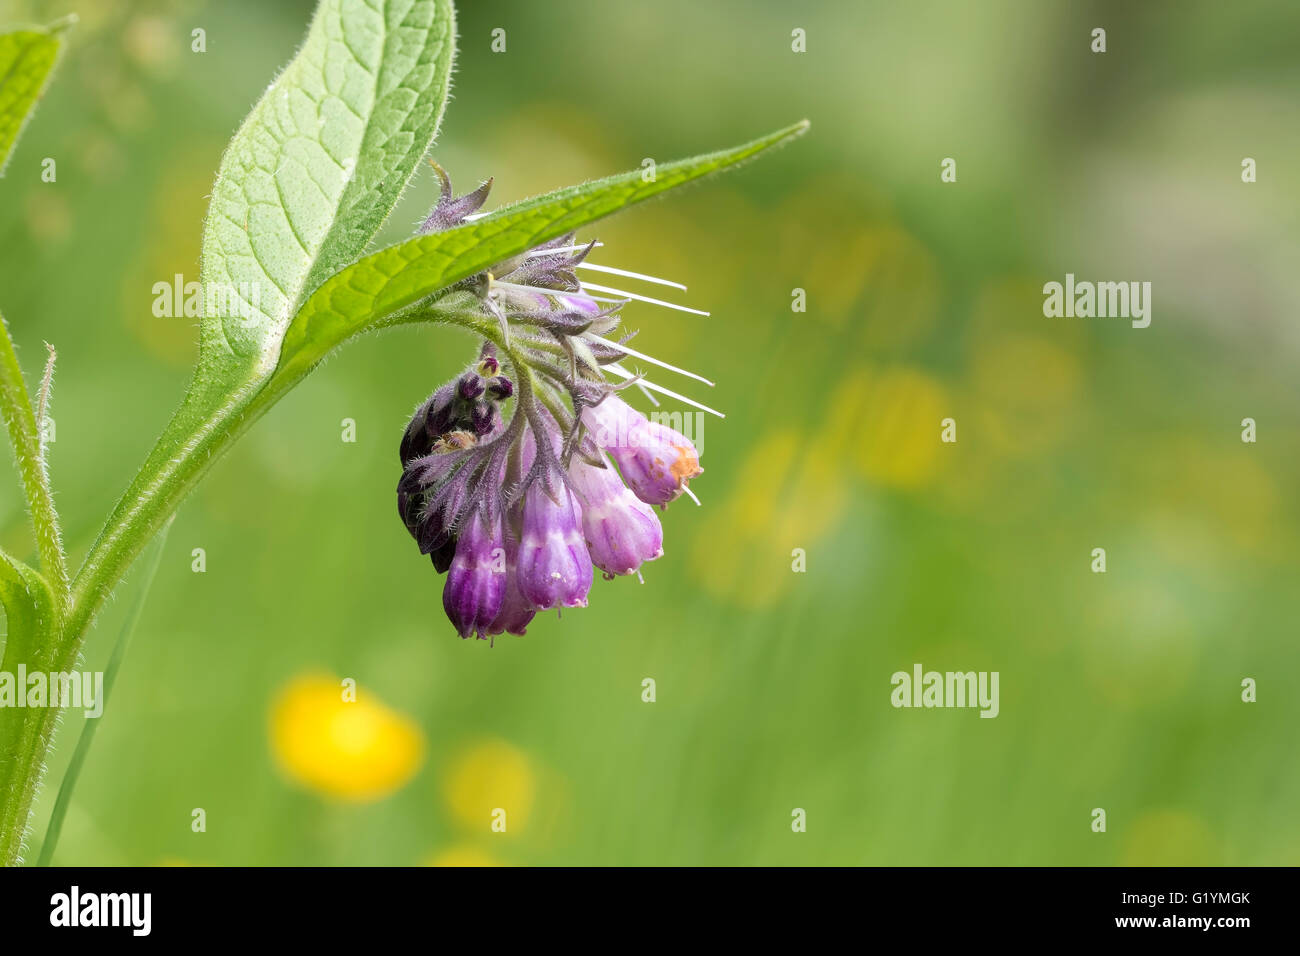 Close-up of purple flowers on a plant called common comfrey or comphrey, Symphytum officinale, blooming in a green meadow. Stock Photo